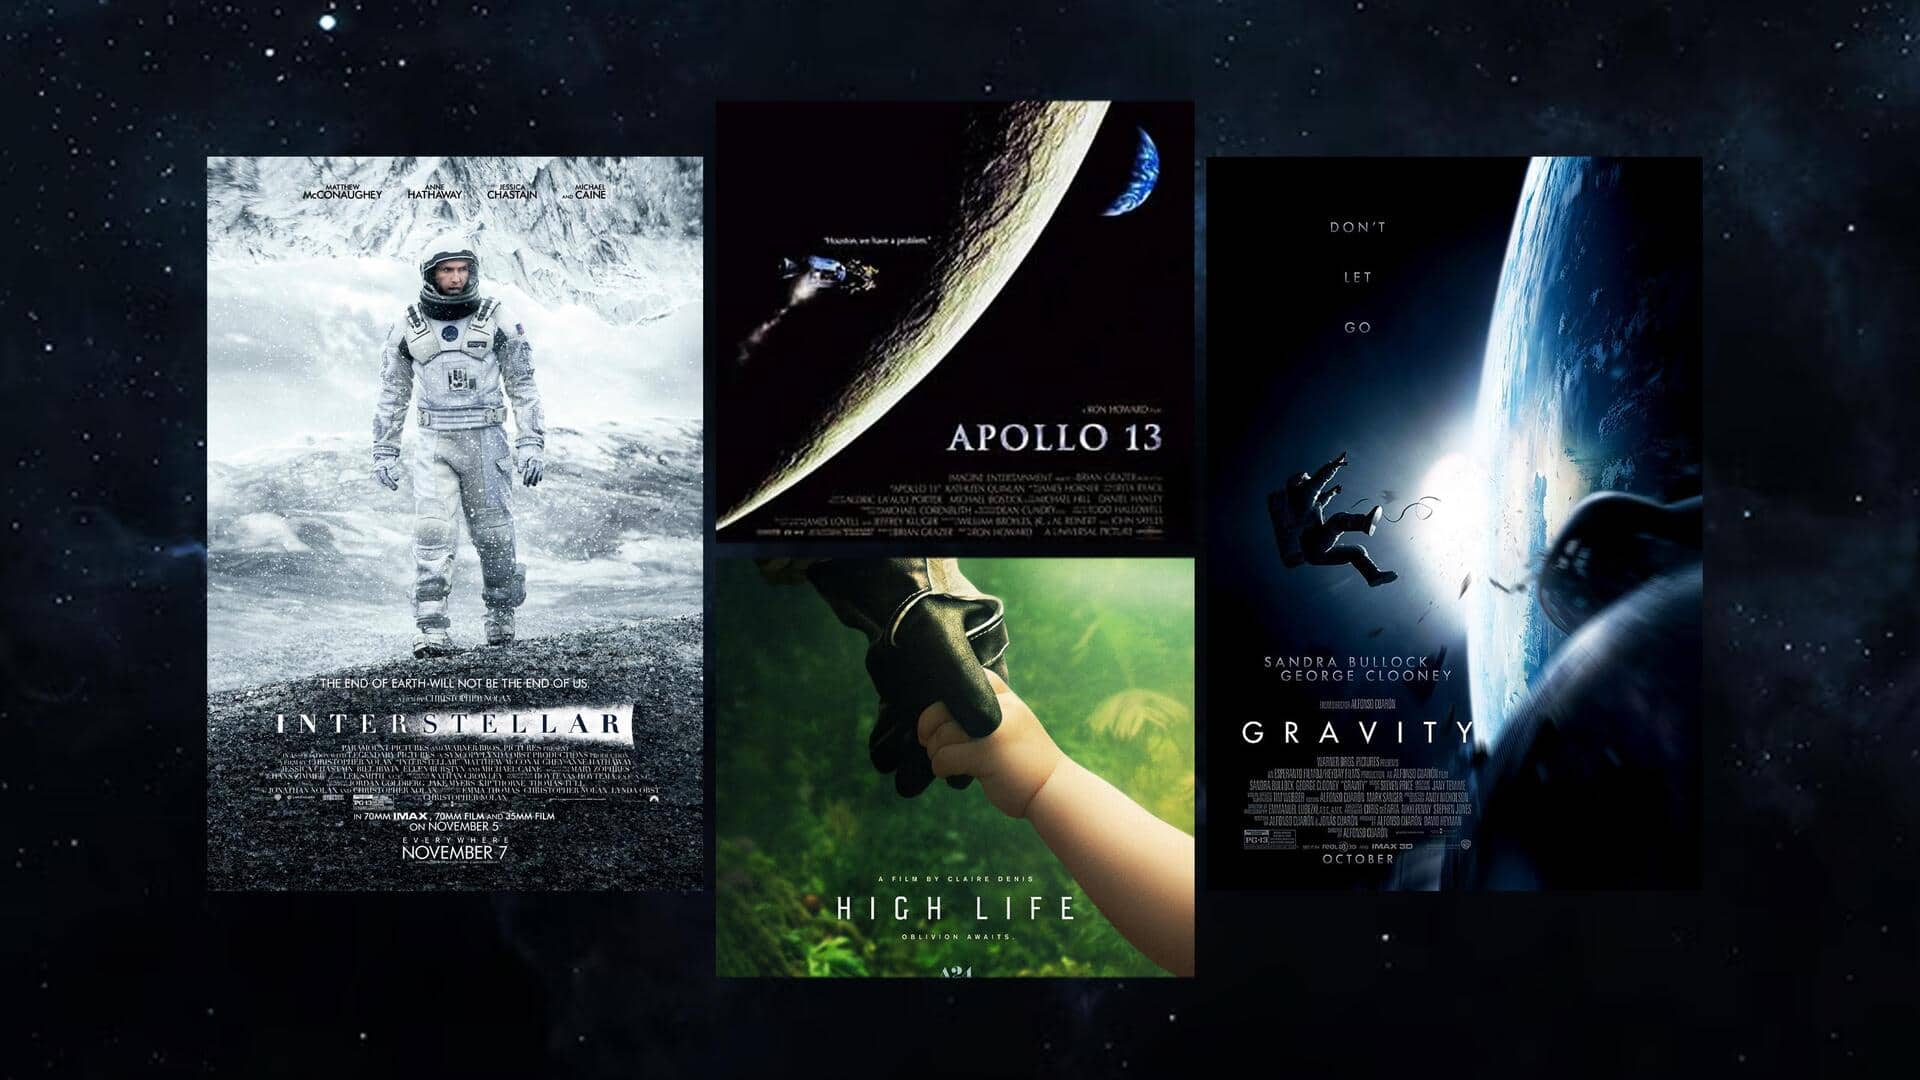 'Interstellar' to 'Moon': Top 5 Hollywood space movies